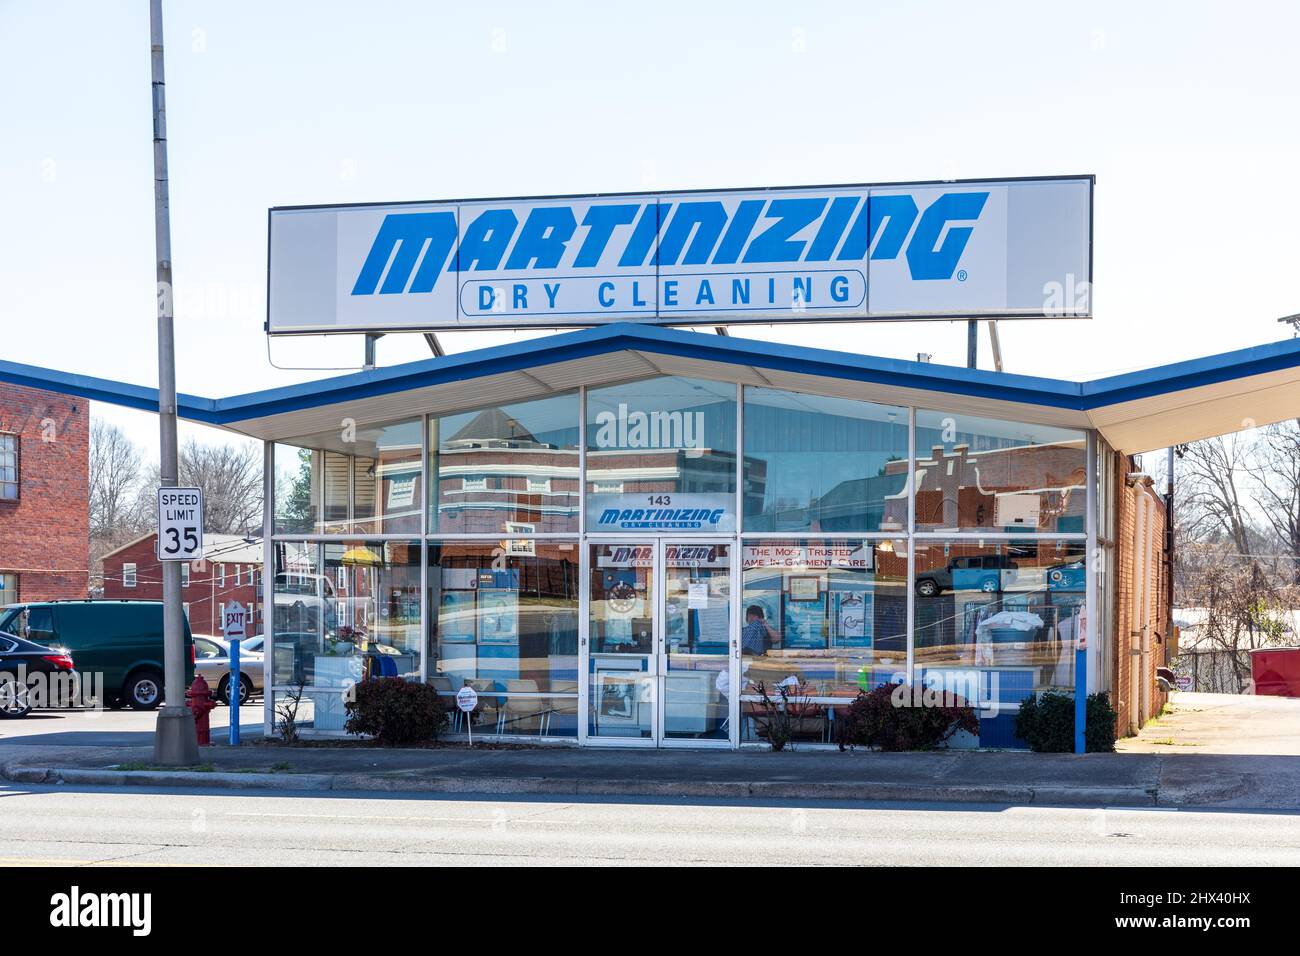 GASTONIA, NC, USA-3 MARCH 2022:  A Martinizing Dry Cleaning center, one of a franchise chain, in nbusiness for over 70 years.  Showing large rooftop s Stock Photo